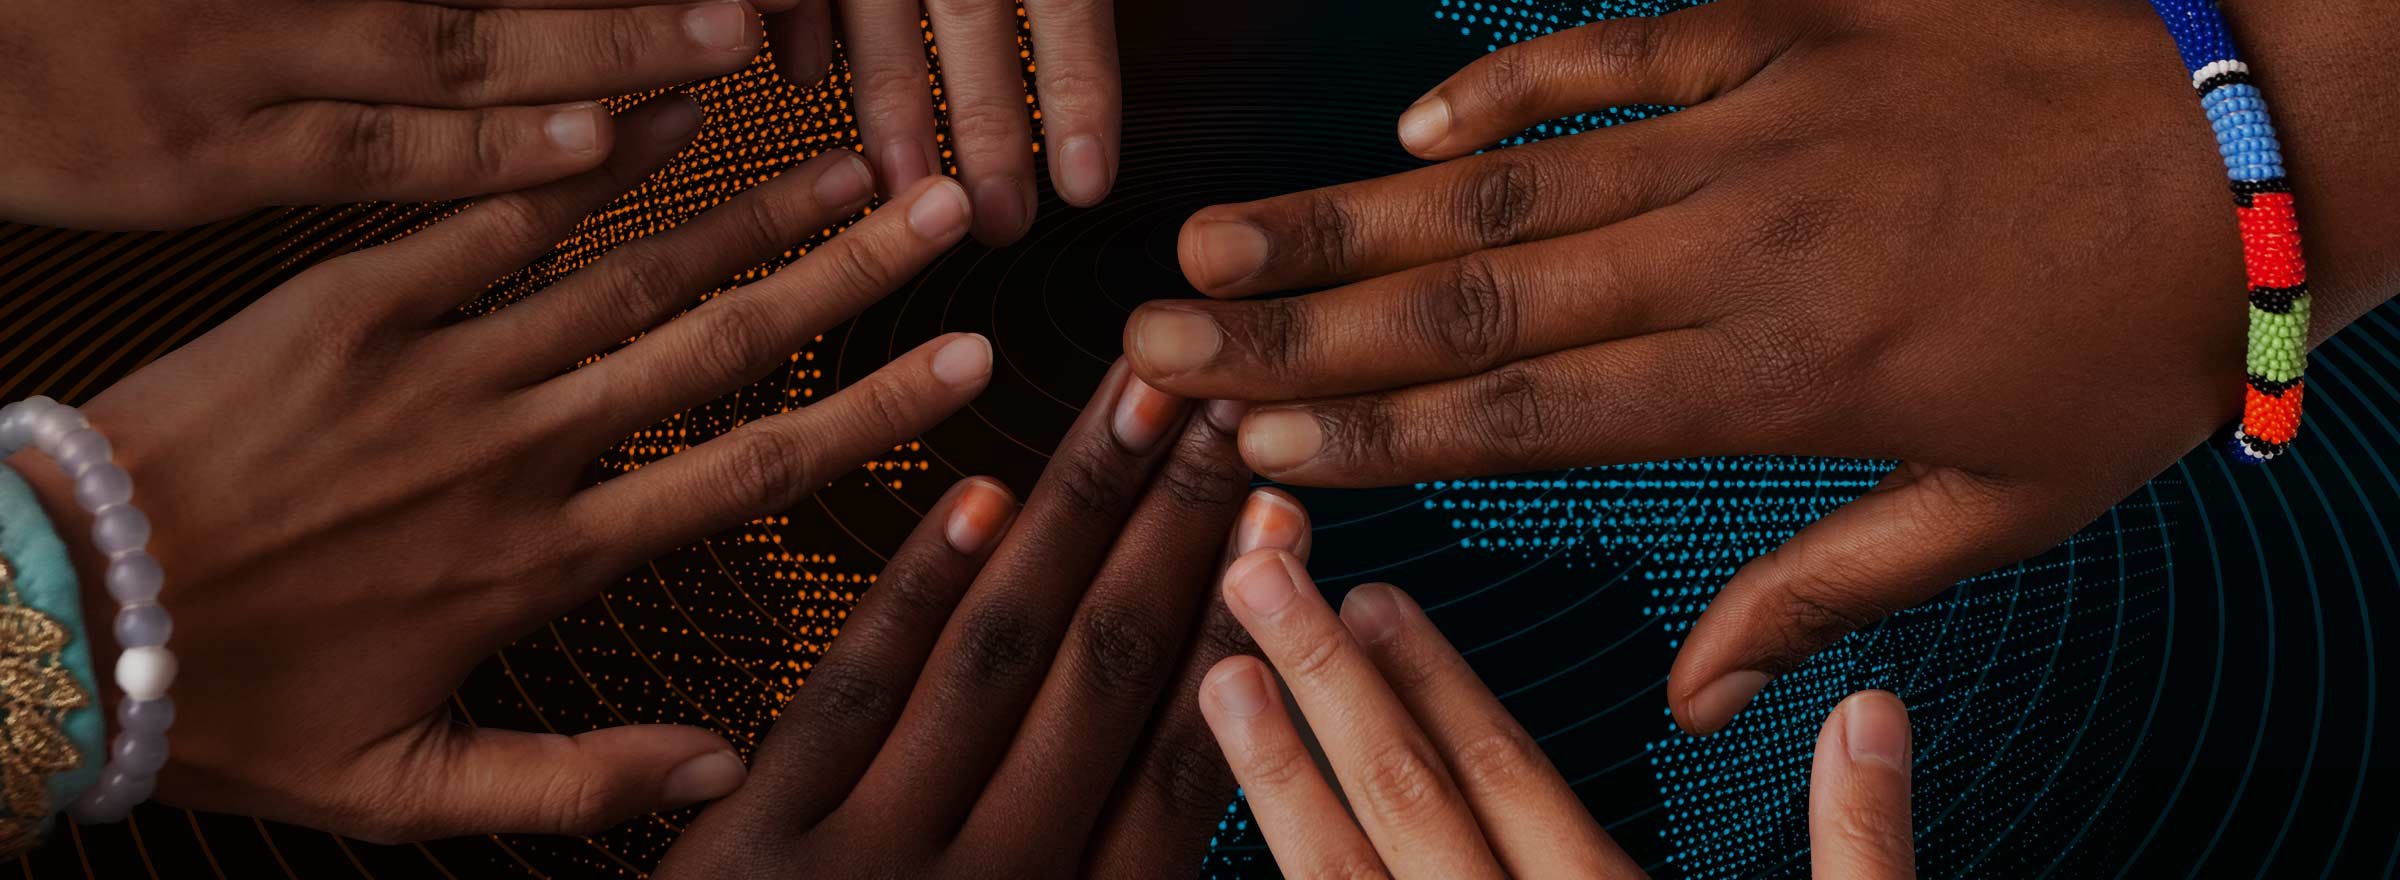 hands of people from many races with fingers outstretched toward each other